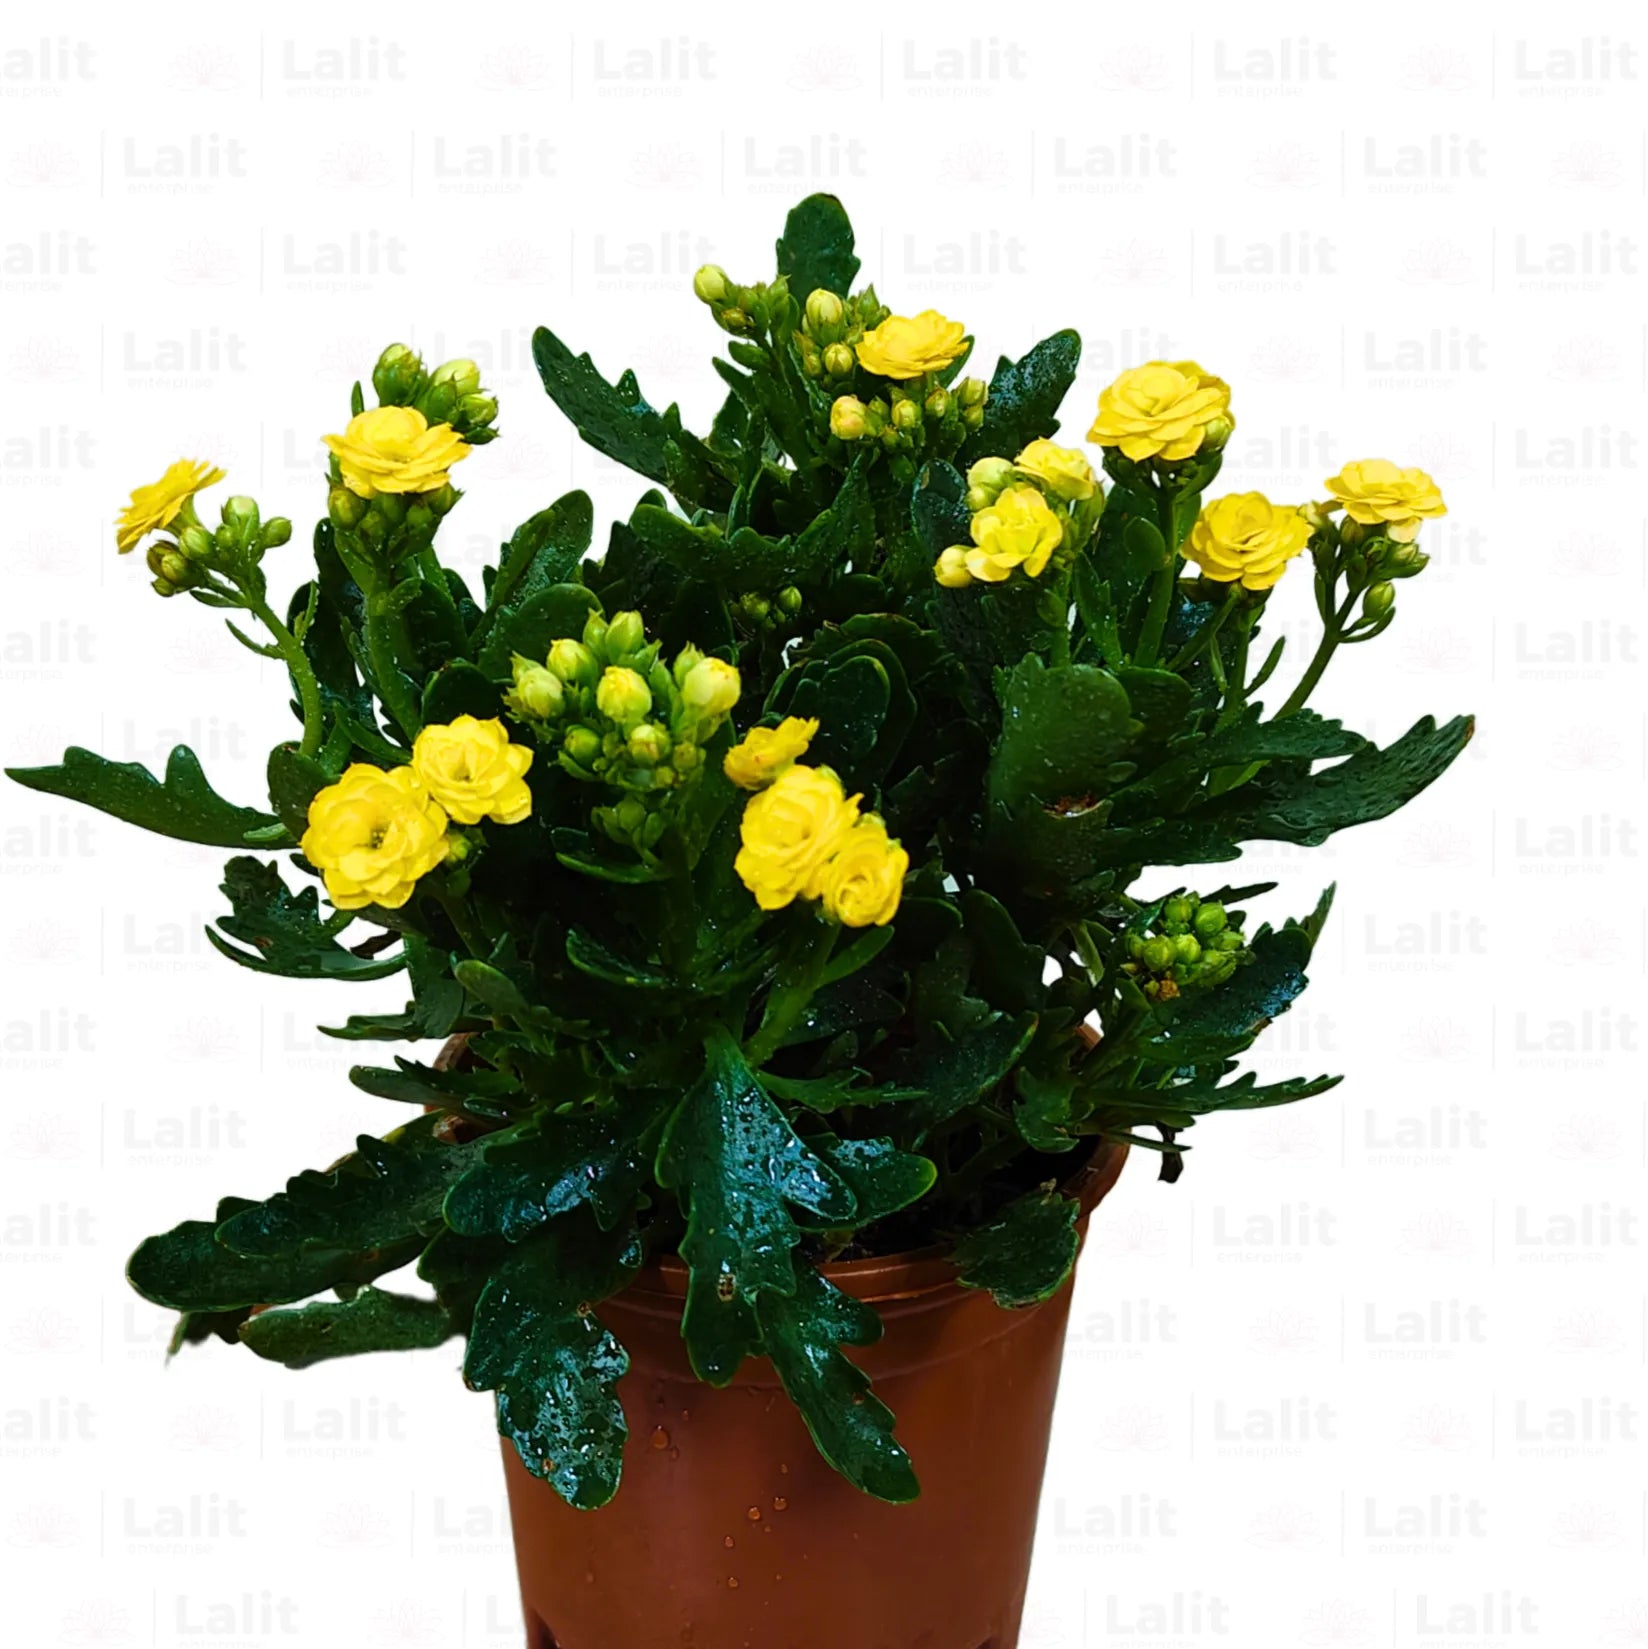 Buy "Widow's-thrill" - Plant Online at Lalitenterprise